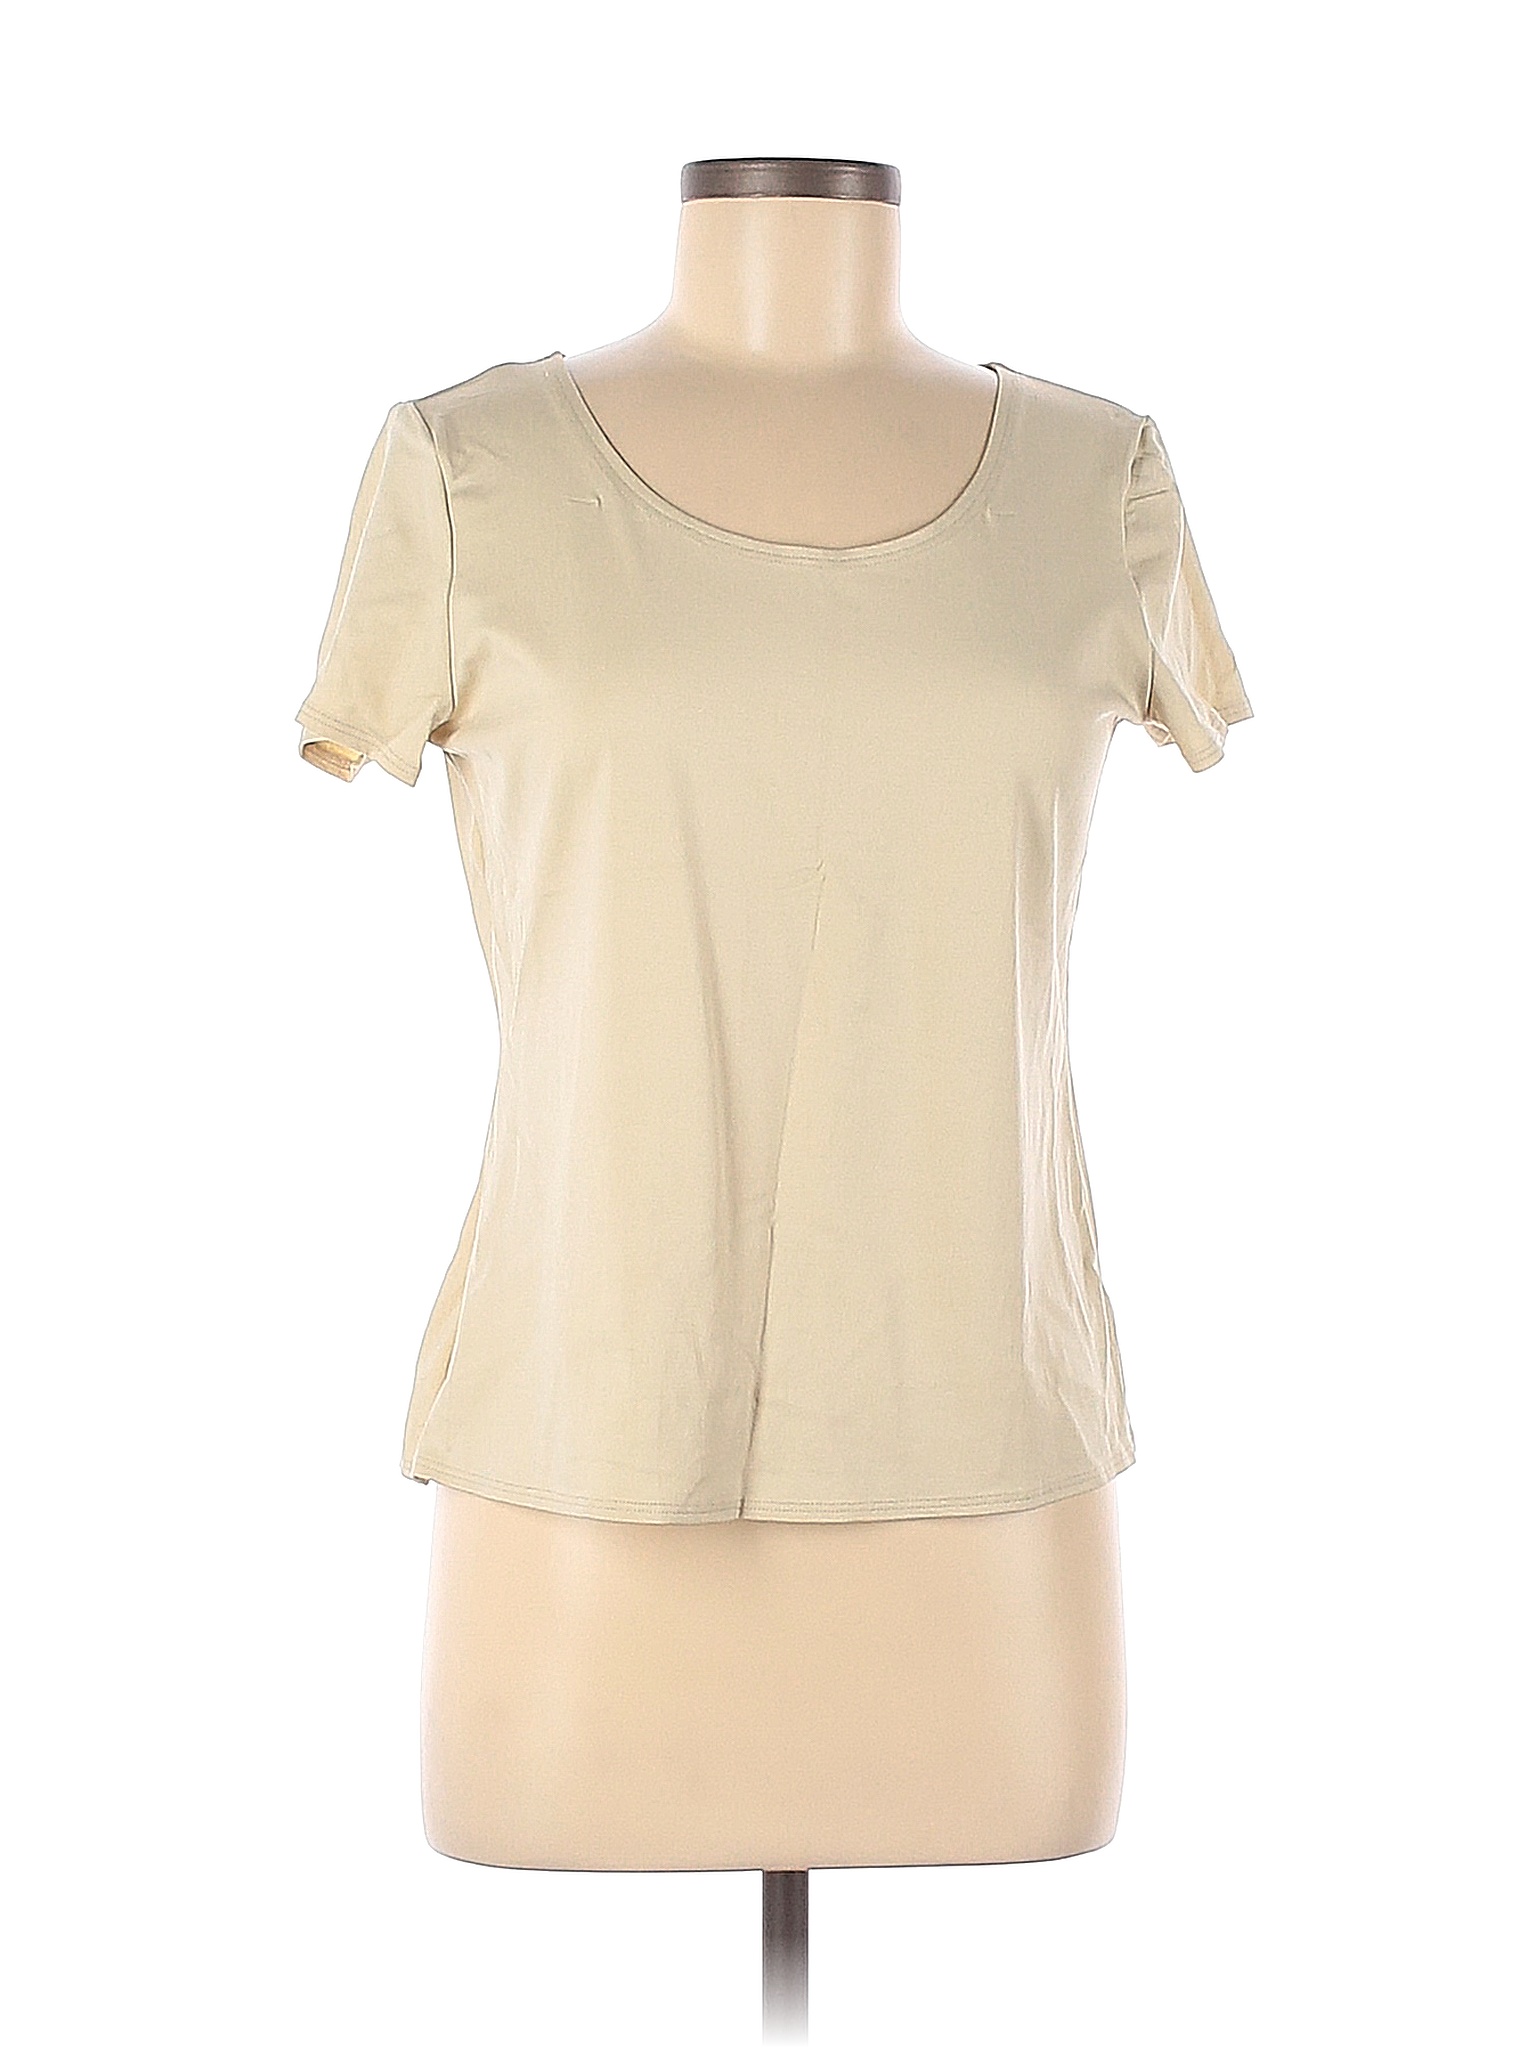 Notations Solid Tan Ivory Short Sleeve T-Shirt Size M - 61% off | thredUP